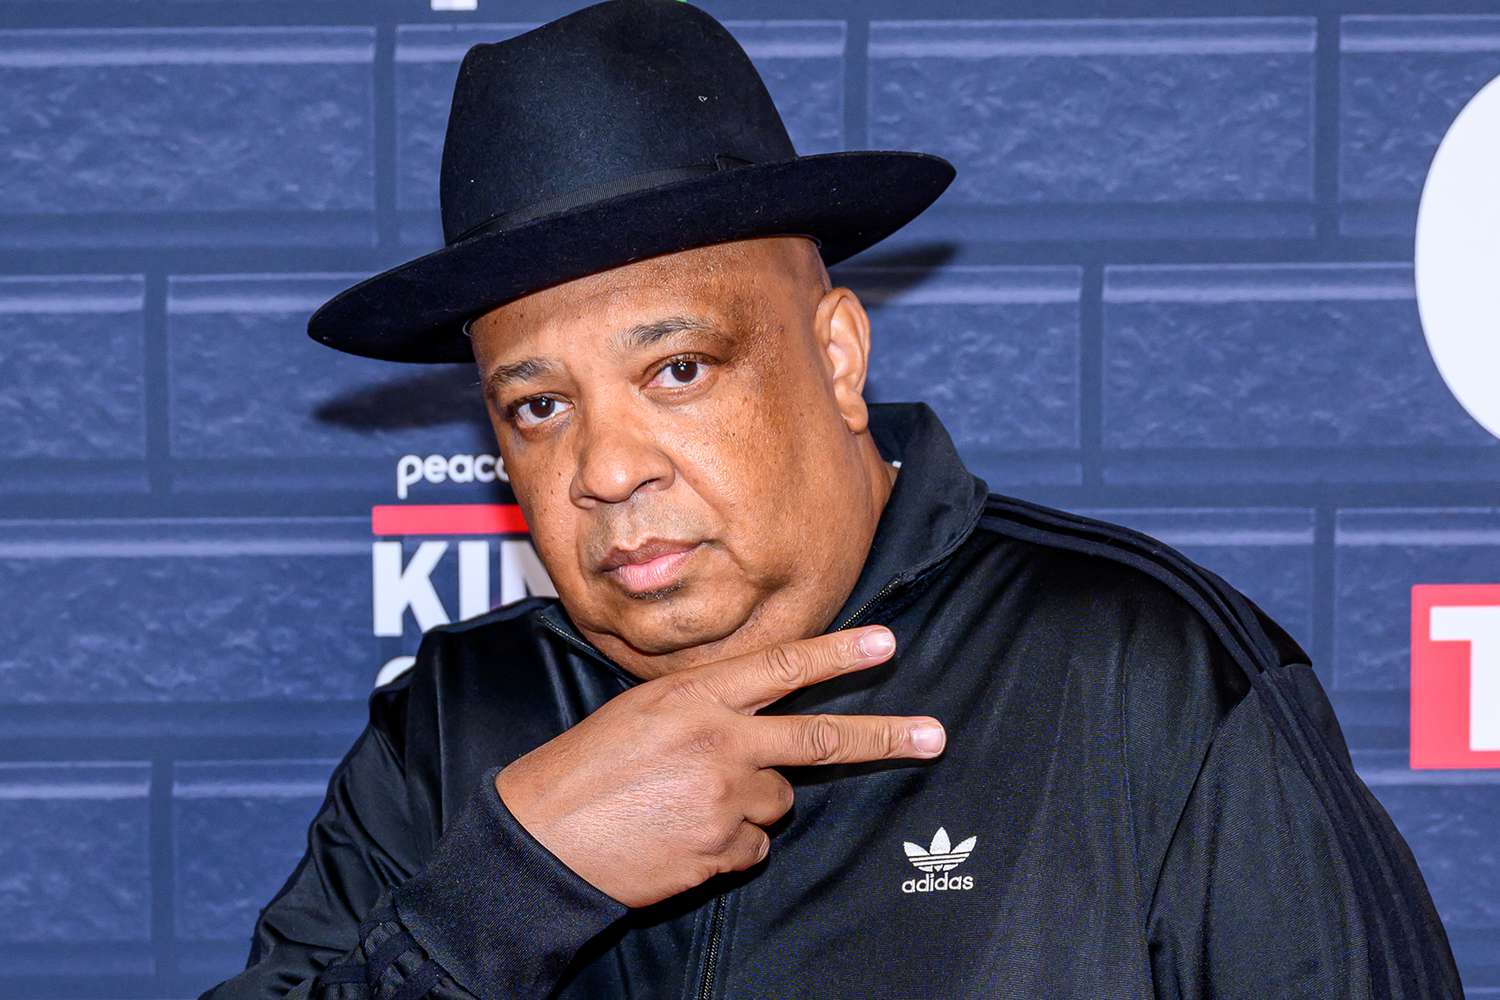 Joseph "Rev Run" Simmons attends Peacock's "Kings From Queens: The Run DMC Story" New York premiere at The Times Center on January 27, 2024 in New York City.